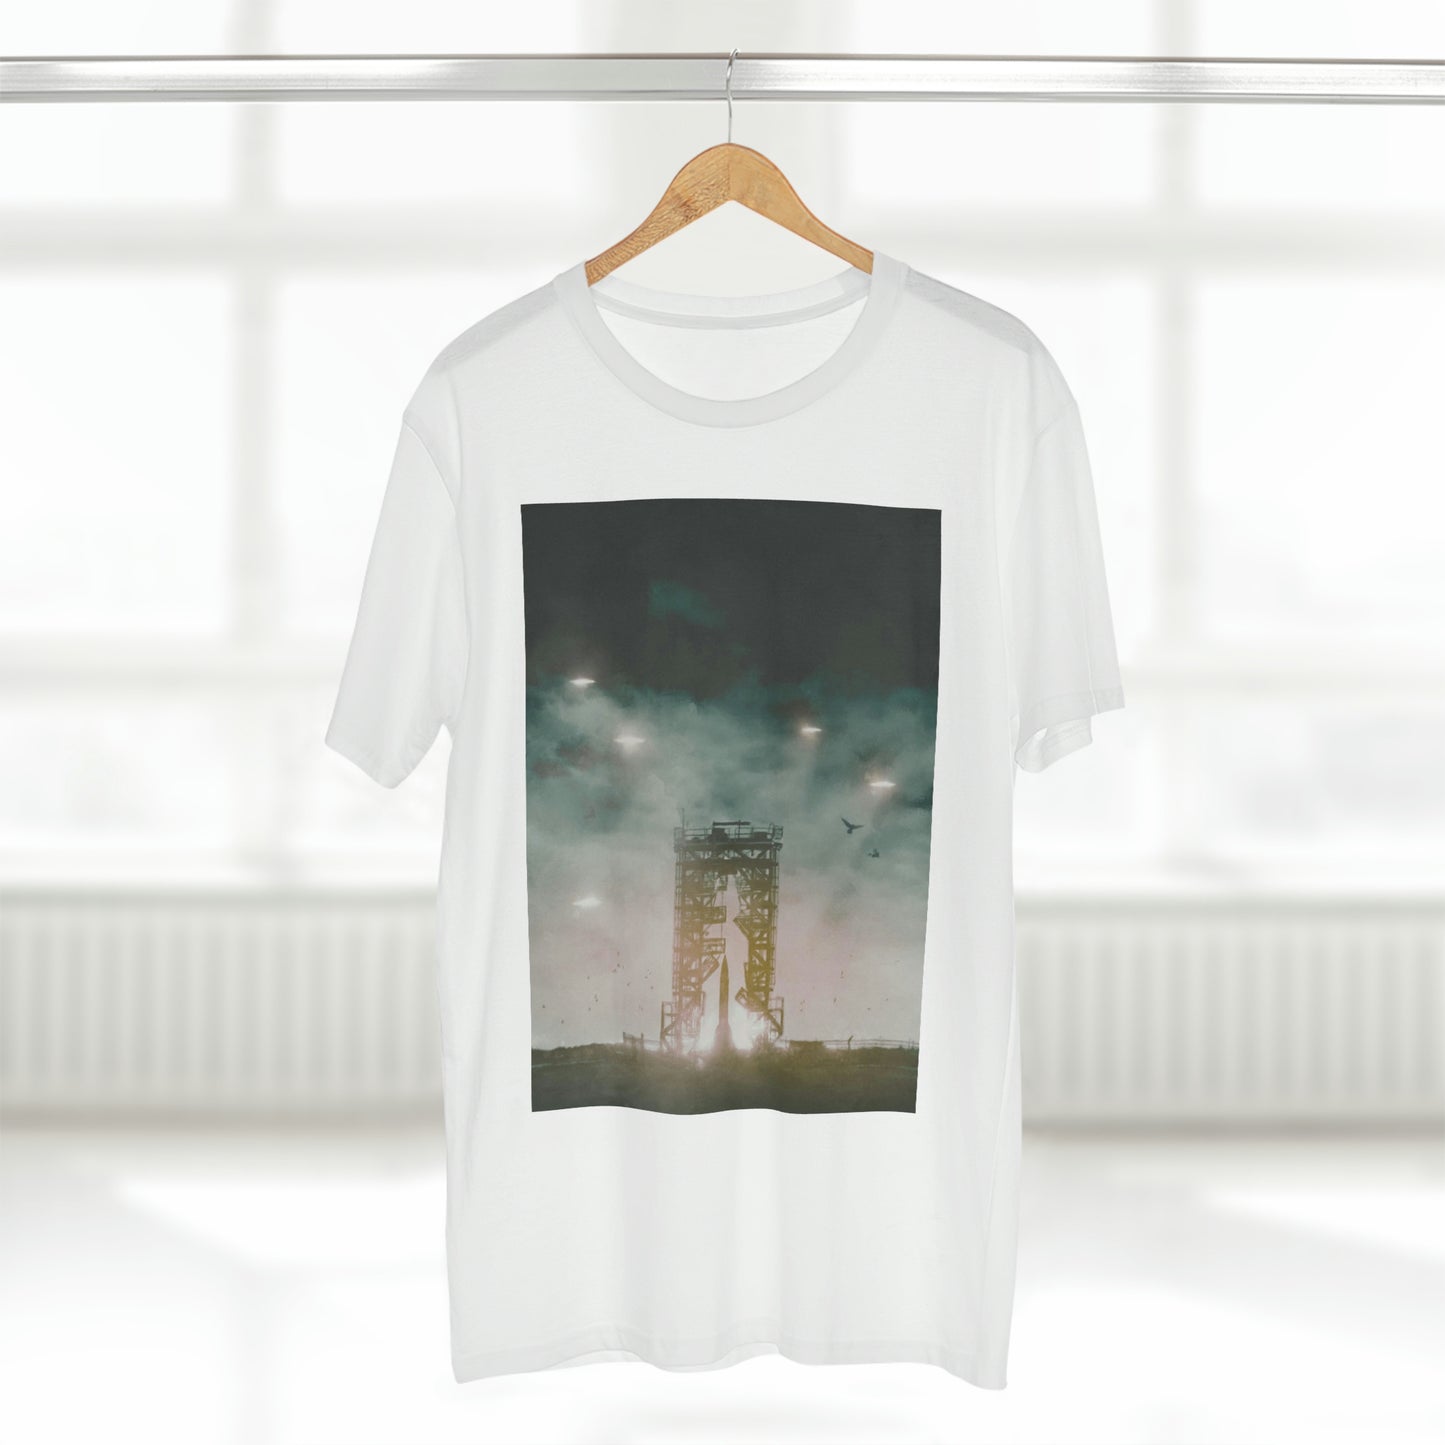 White Sands Graphic Tee